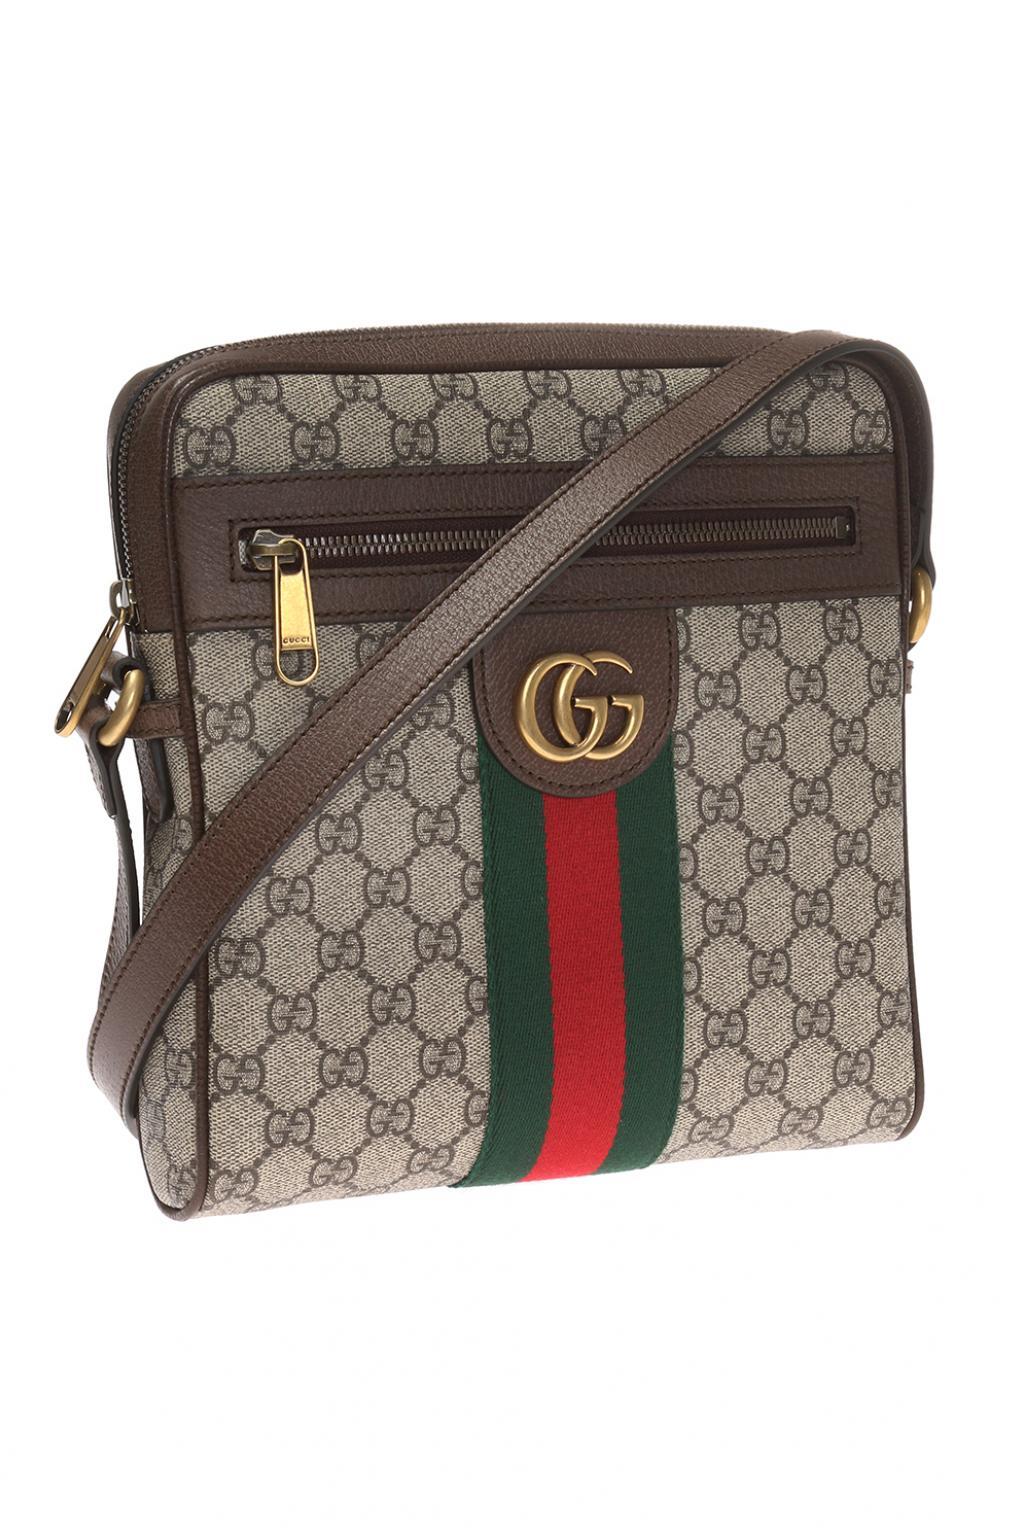 Gucci Leather 'ophidia' Shoulder Bag in Brown for Men - Save 16% - Lyst